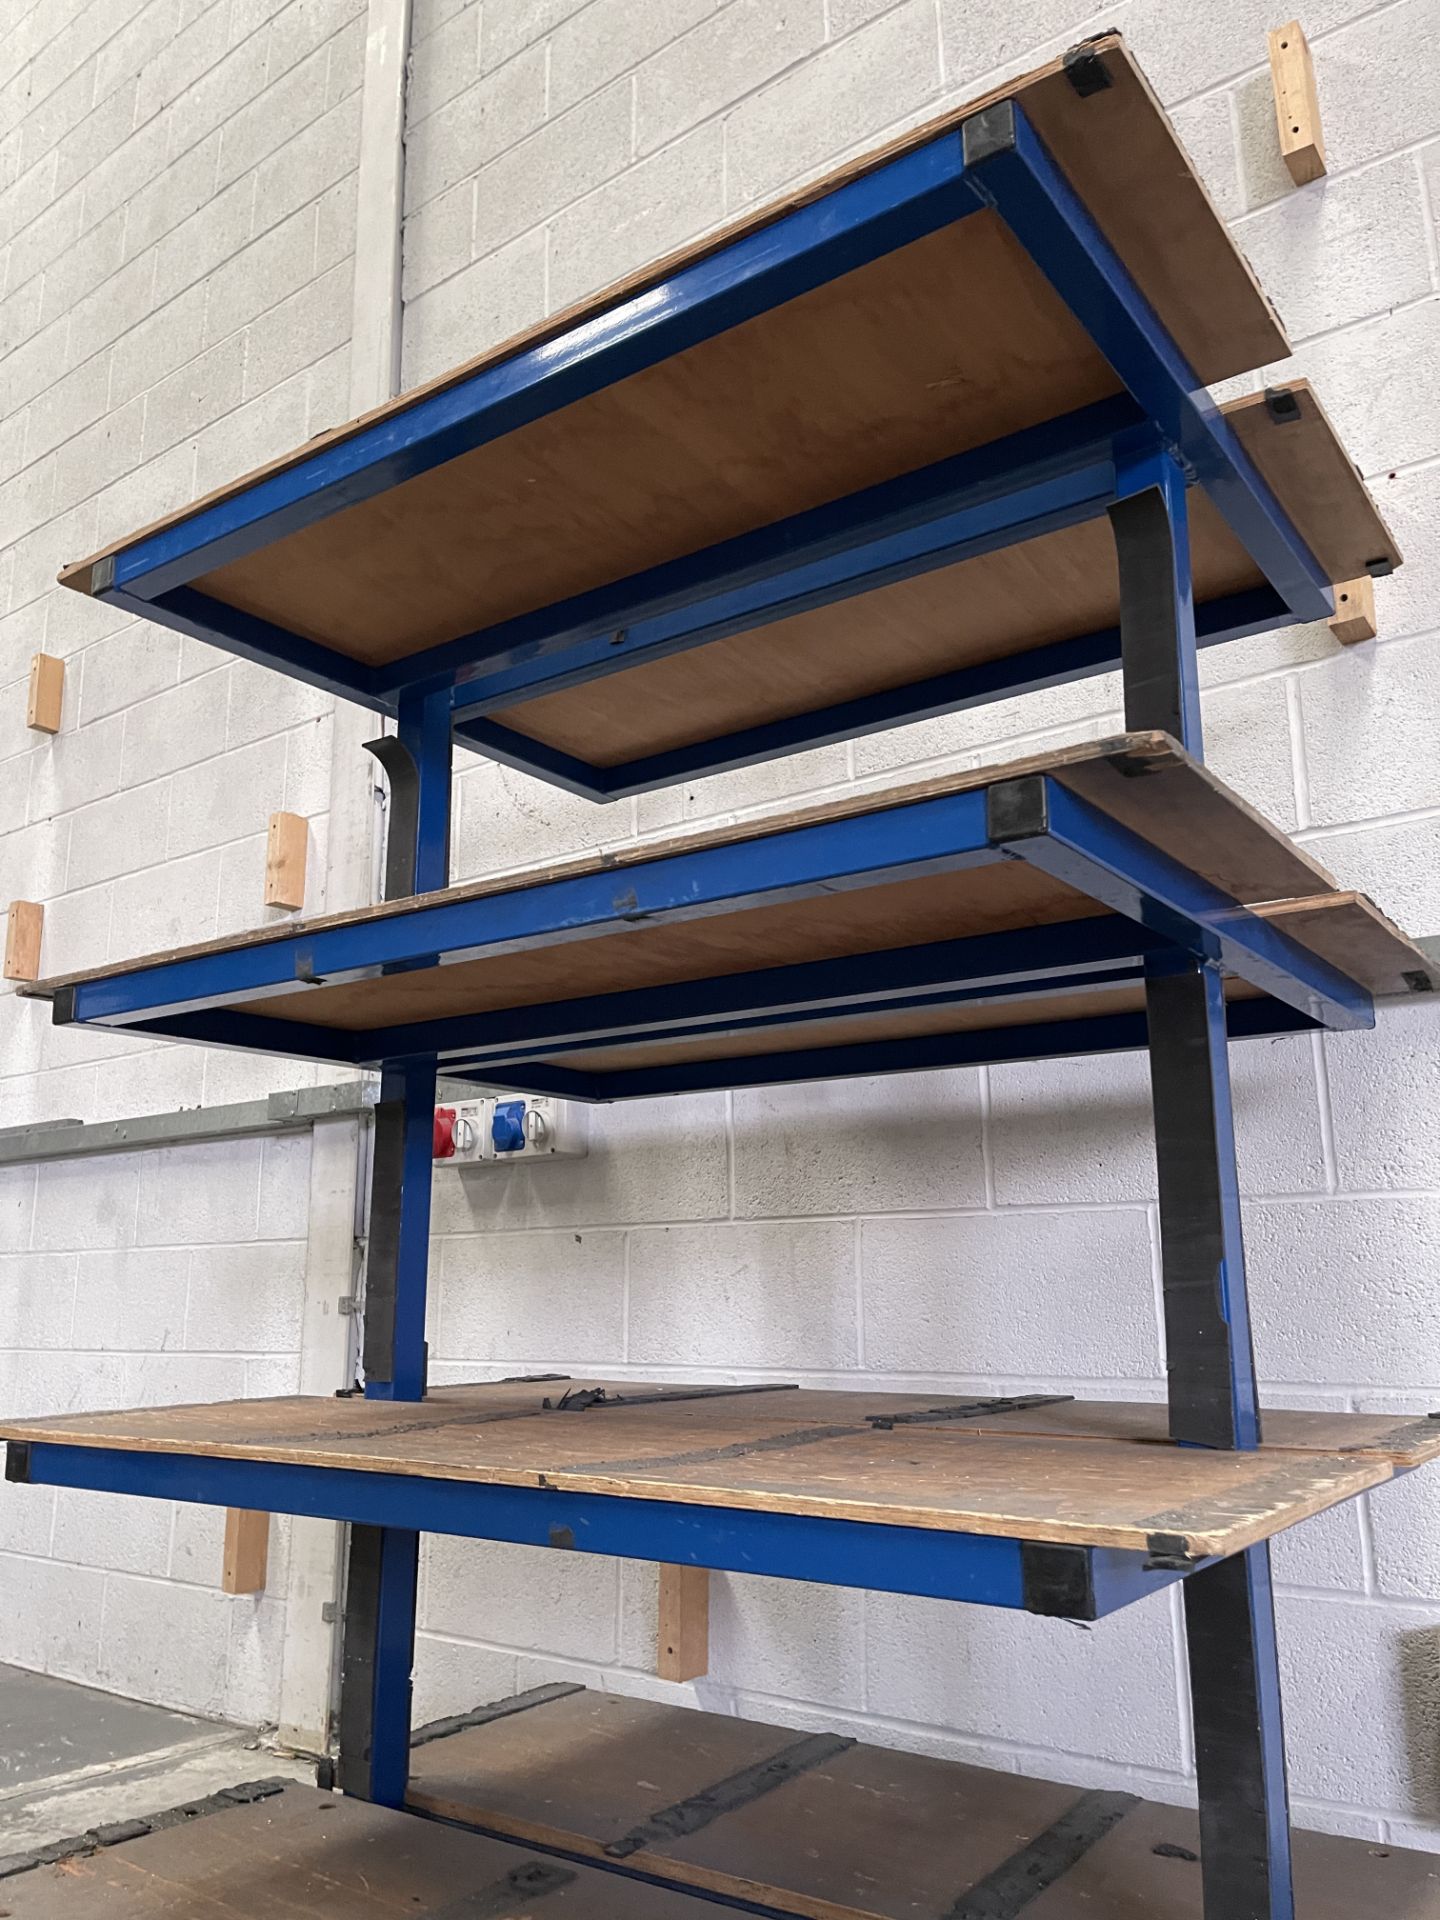 Heavy Duty Mobile Work Trolley. Steel Tube Construction With Wooden Shelving. - Image 4 of 7